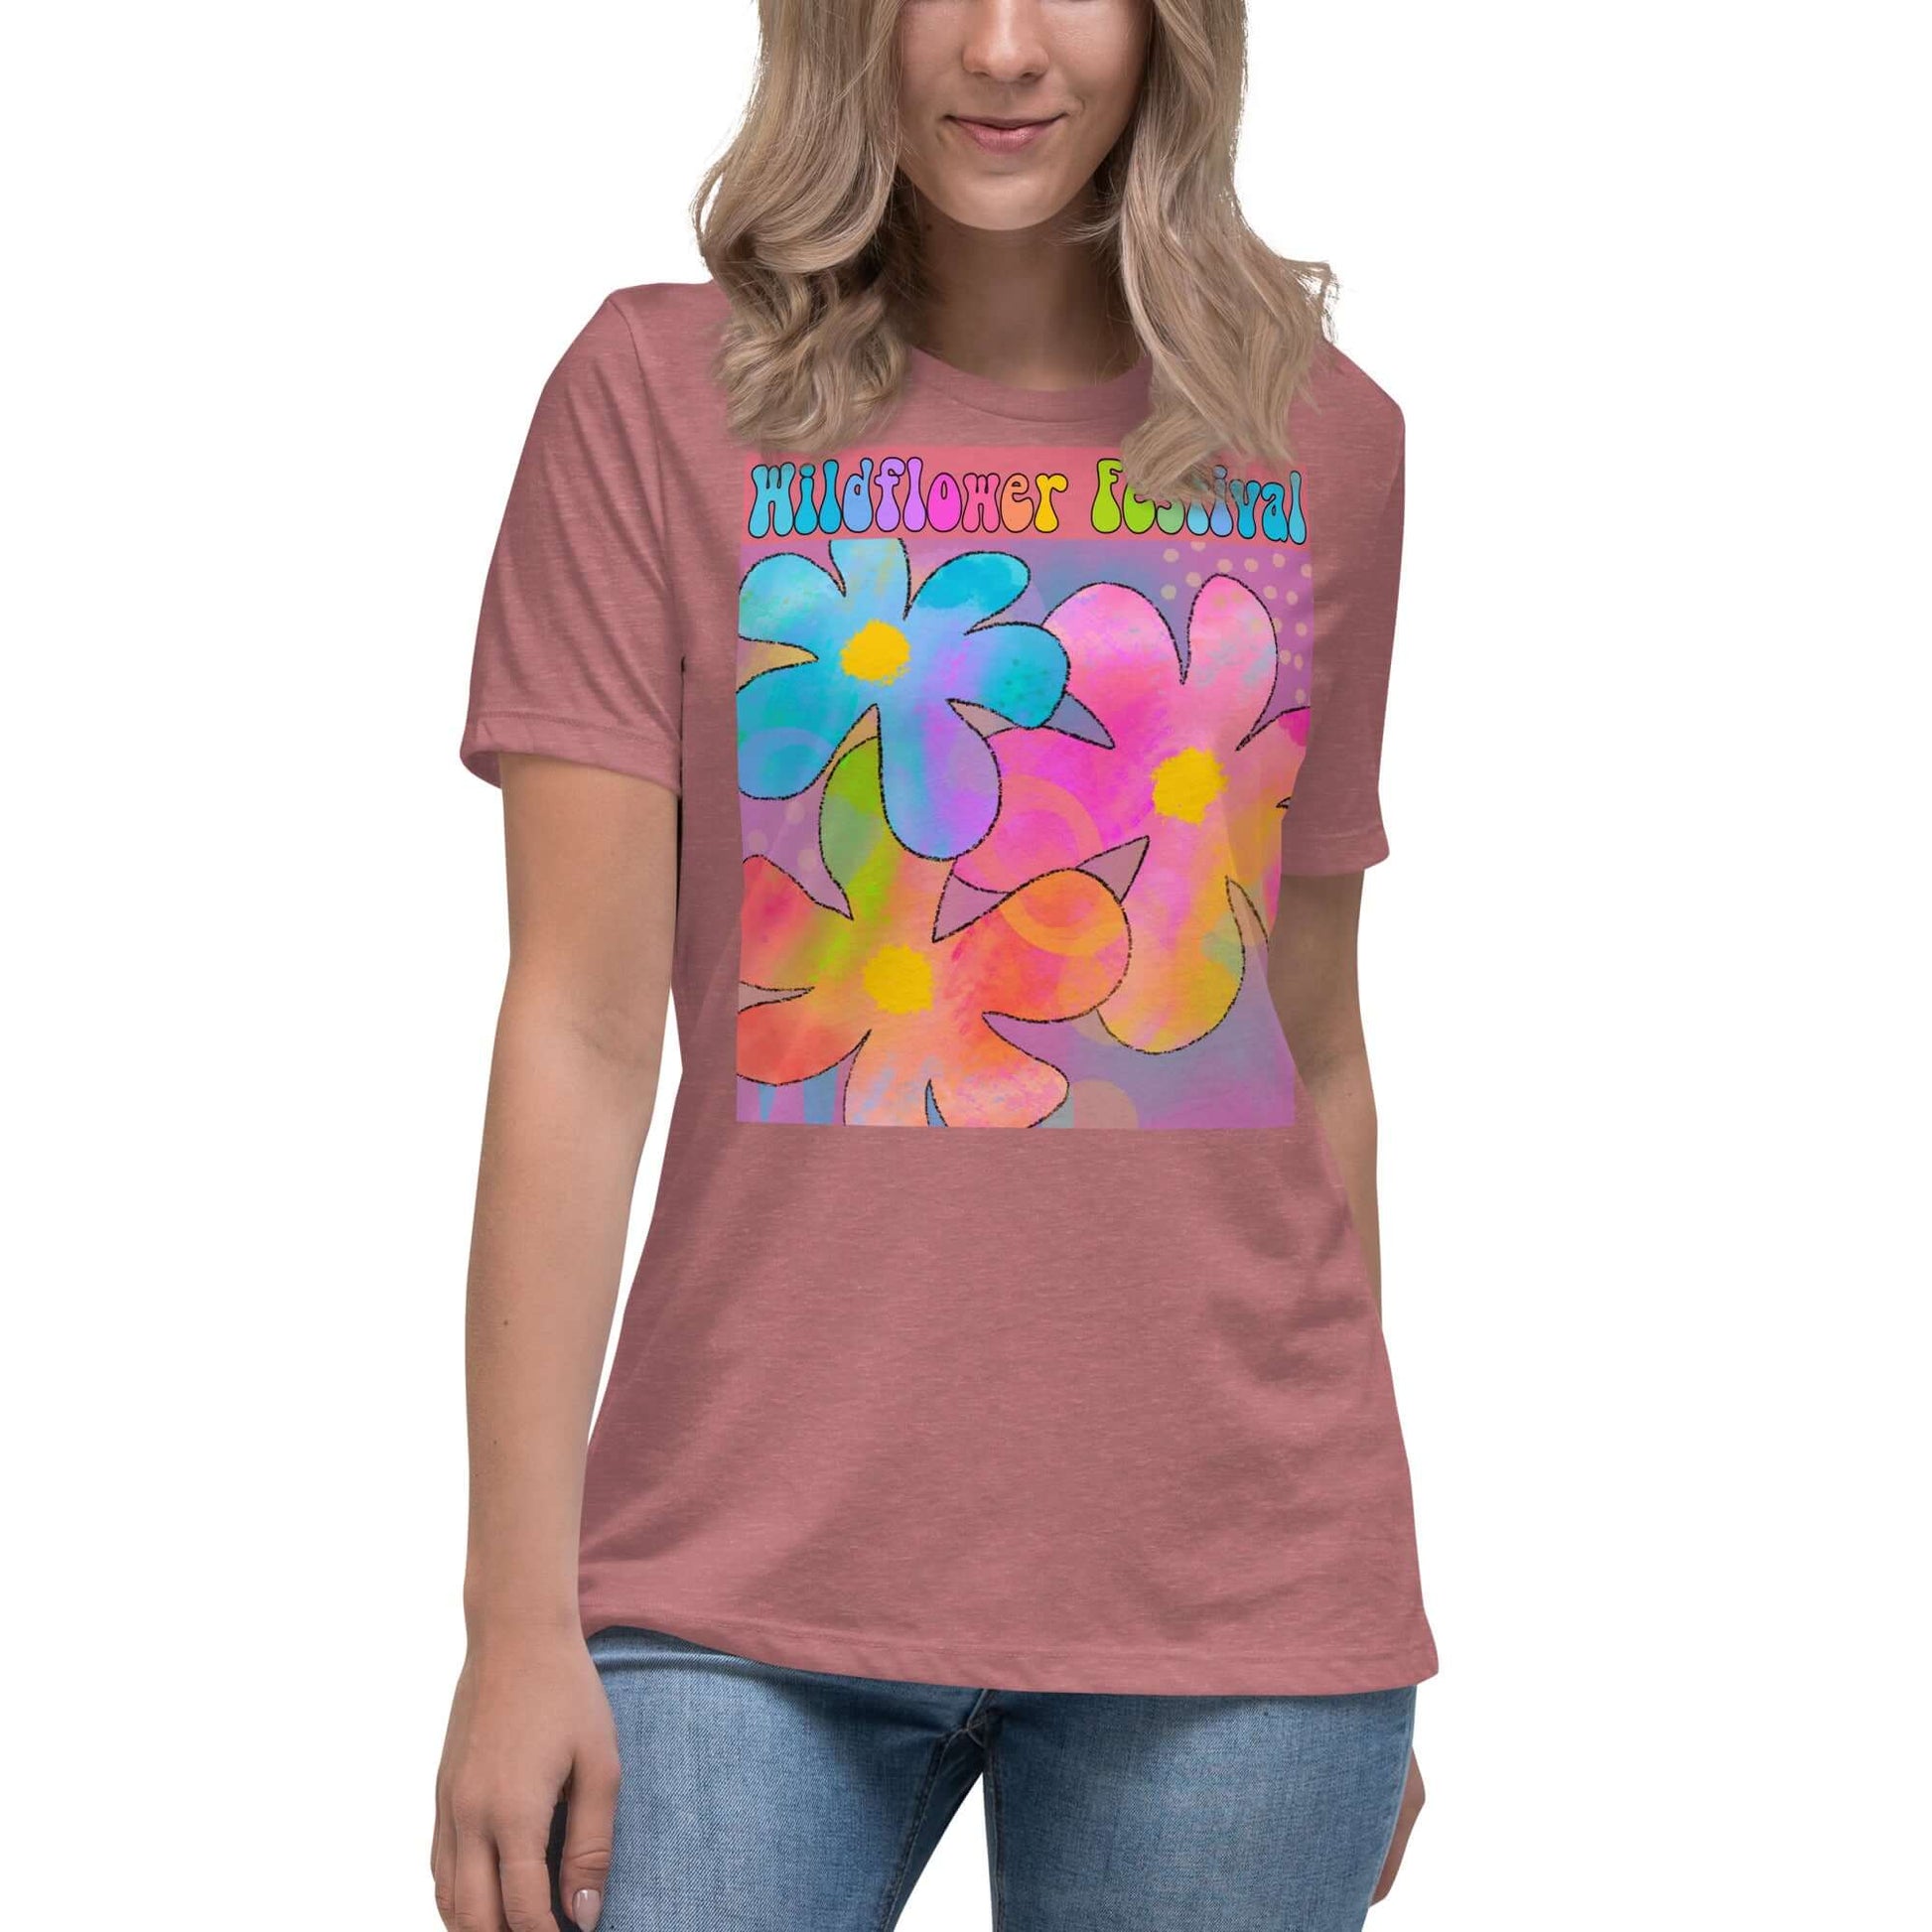 Big Colorful Hippie 1960s Psychedelic Flowers with Text “Wildflower Festival” Women’s Short Sleeve Tee in Heather Mauve